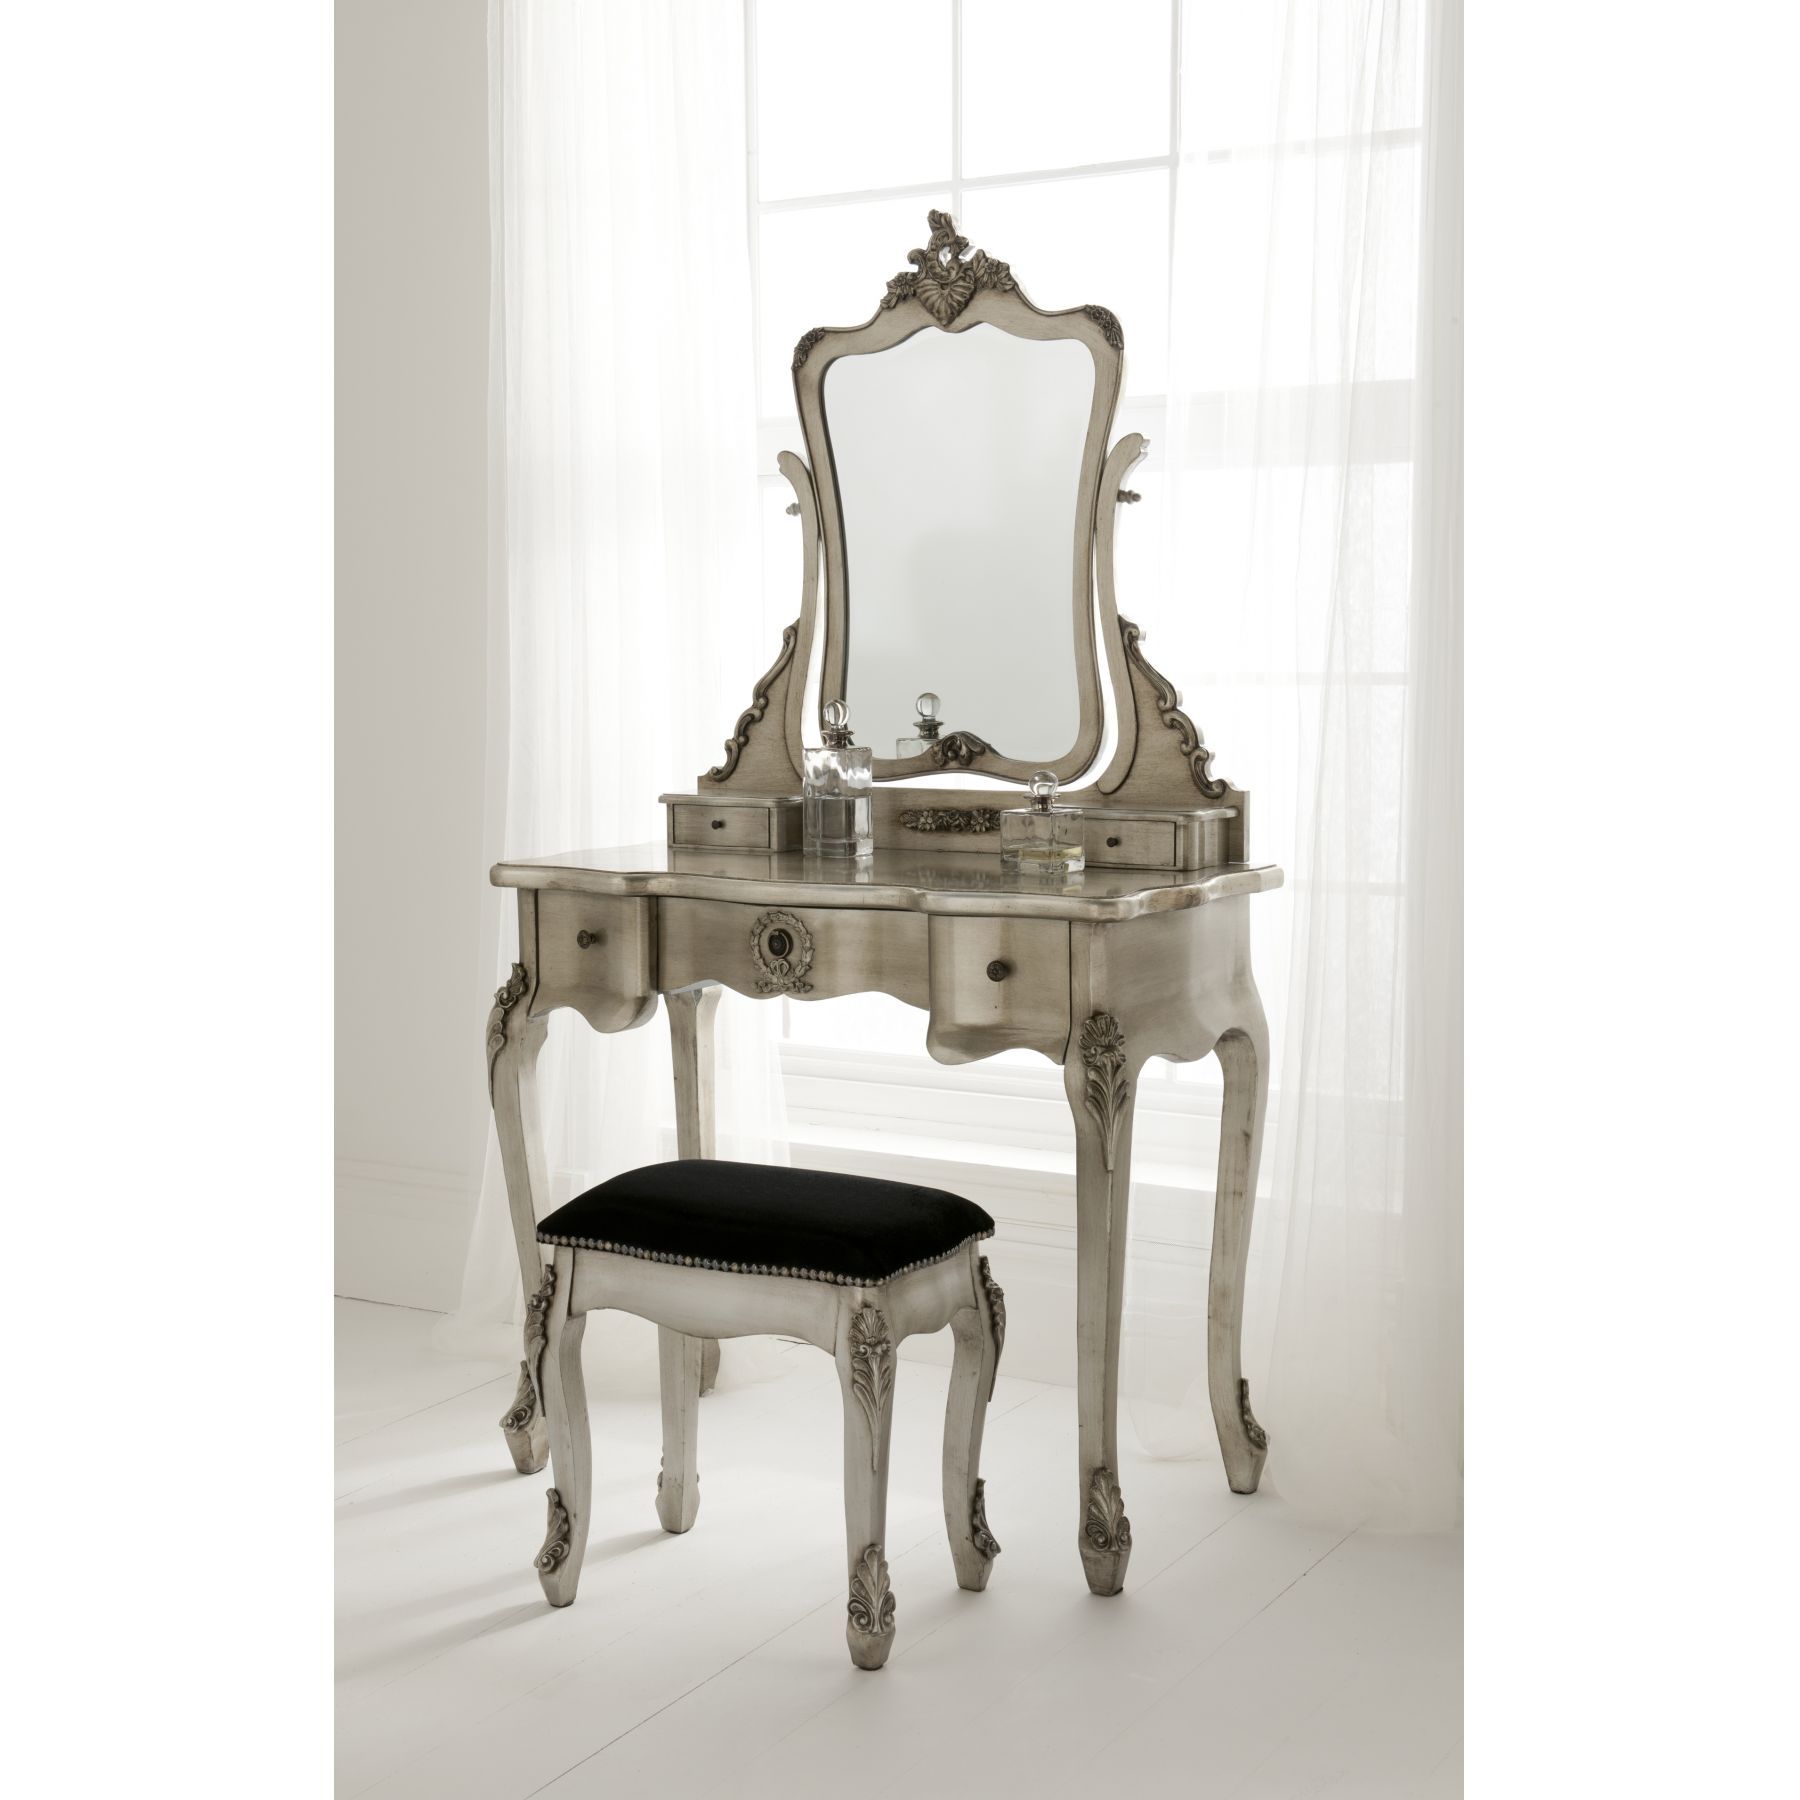 Silver Antique French Dressing Table Set Vintage Pinterest Throughout Vintage Style Mirrors Cheap (View 8 of 15)